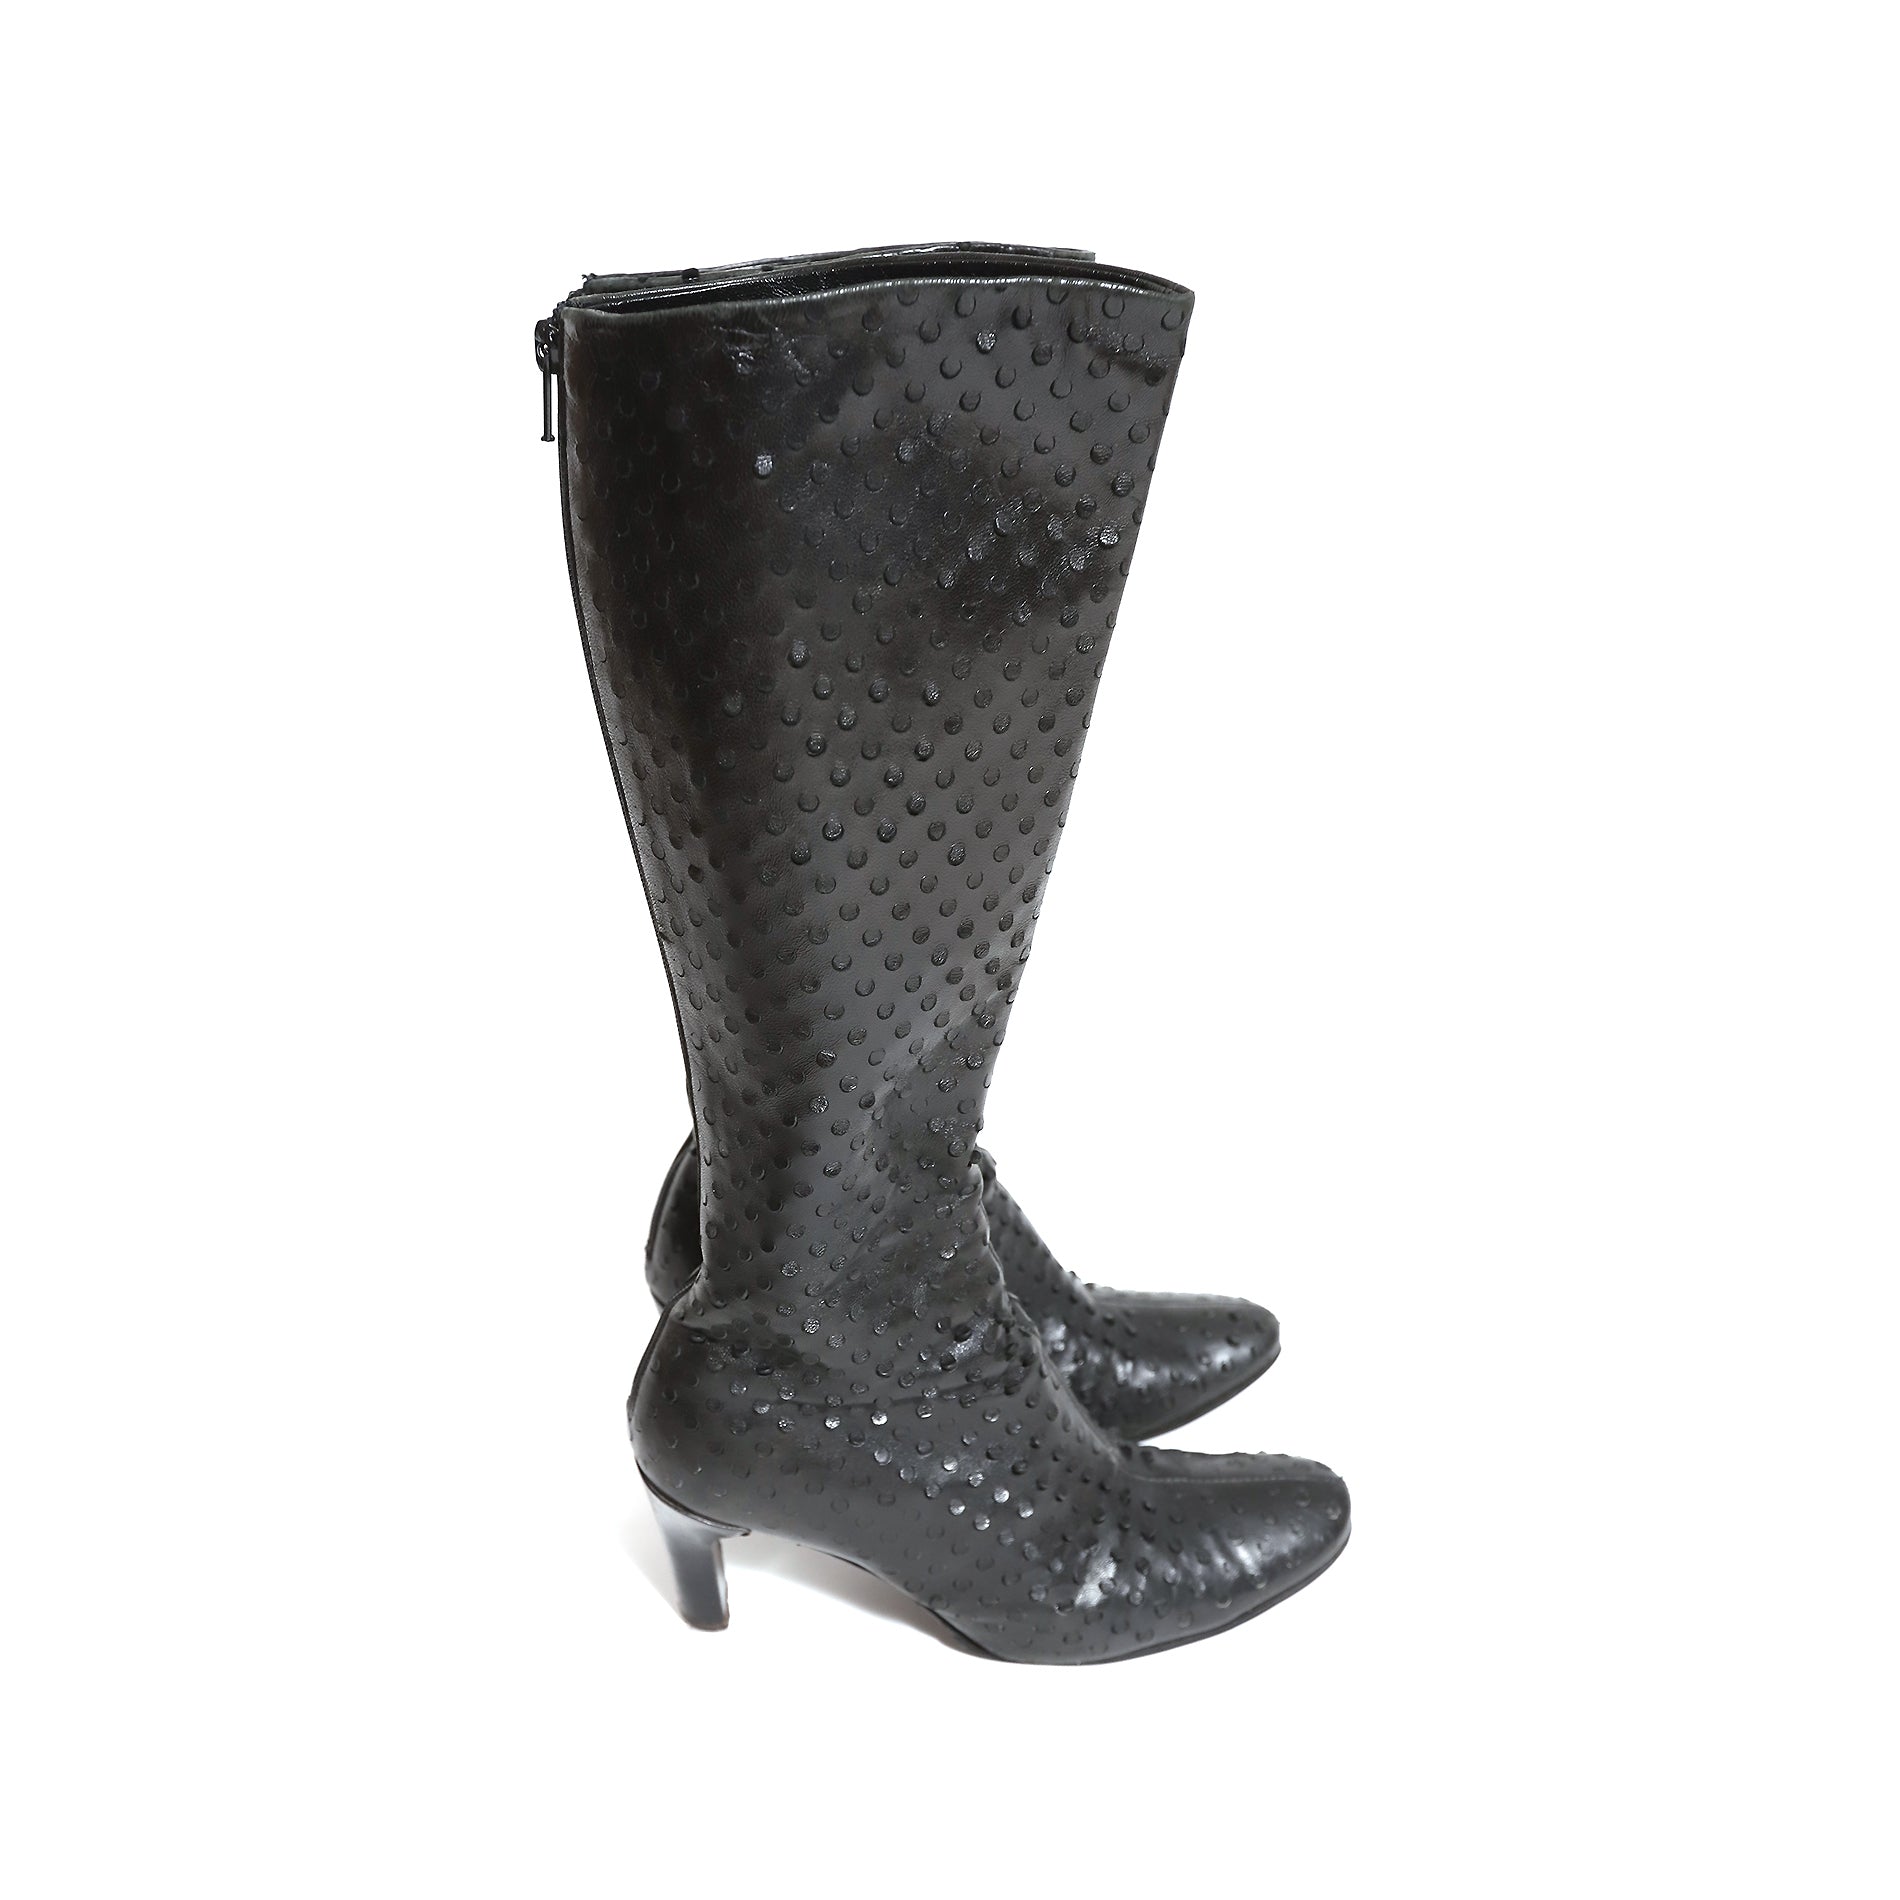 Helmut Lang Archival Black Leather Perforated Heeled Boots